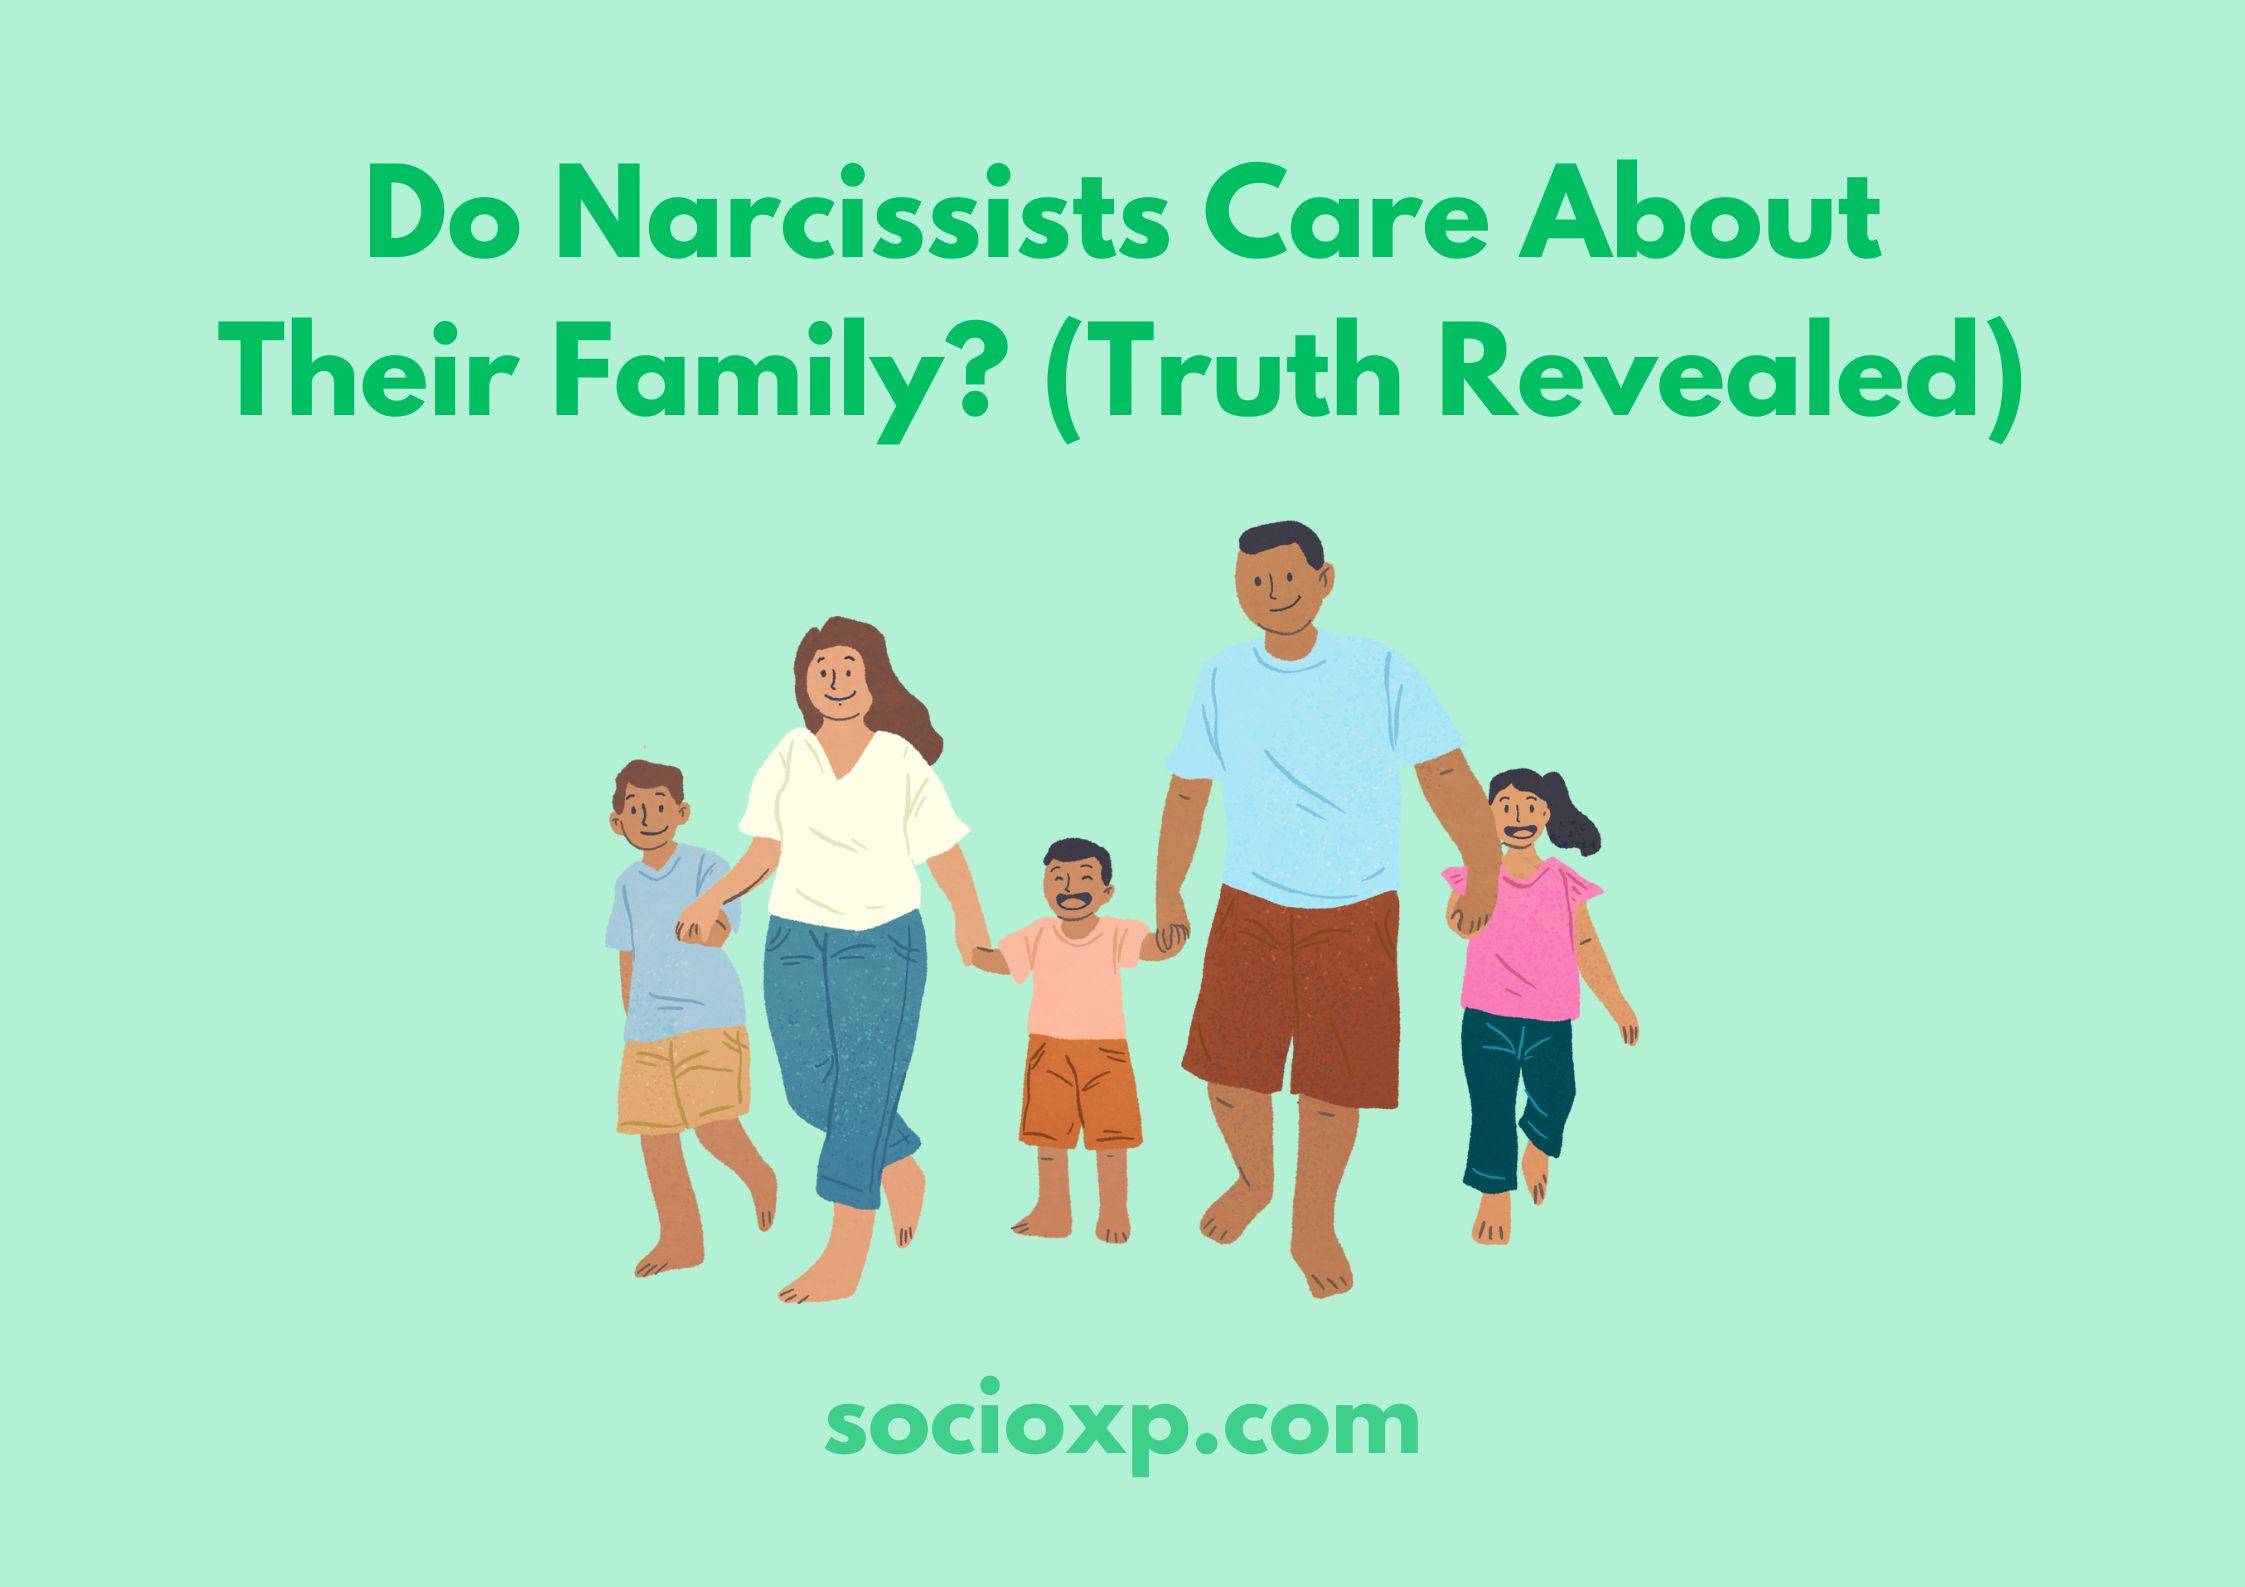 Do Narcissists Care About Their Family? (Truth Revealed)